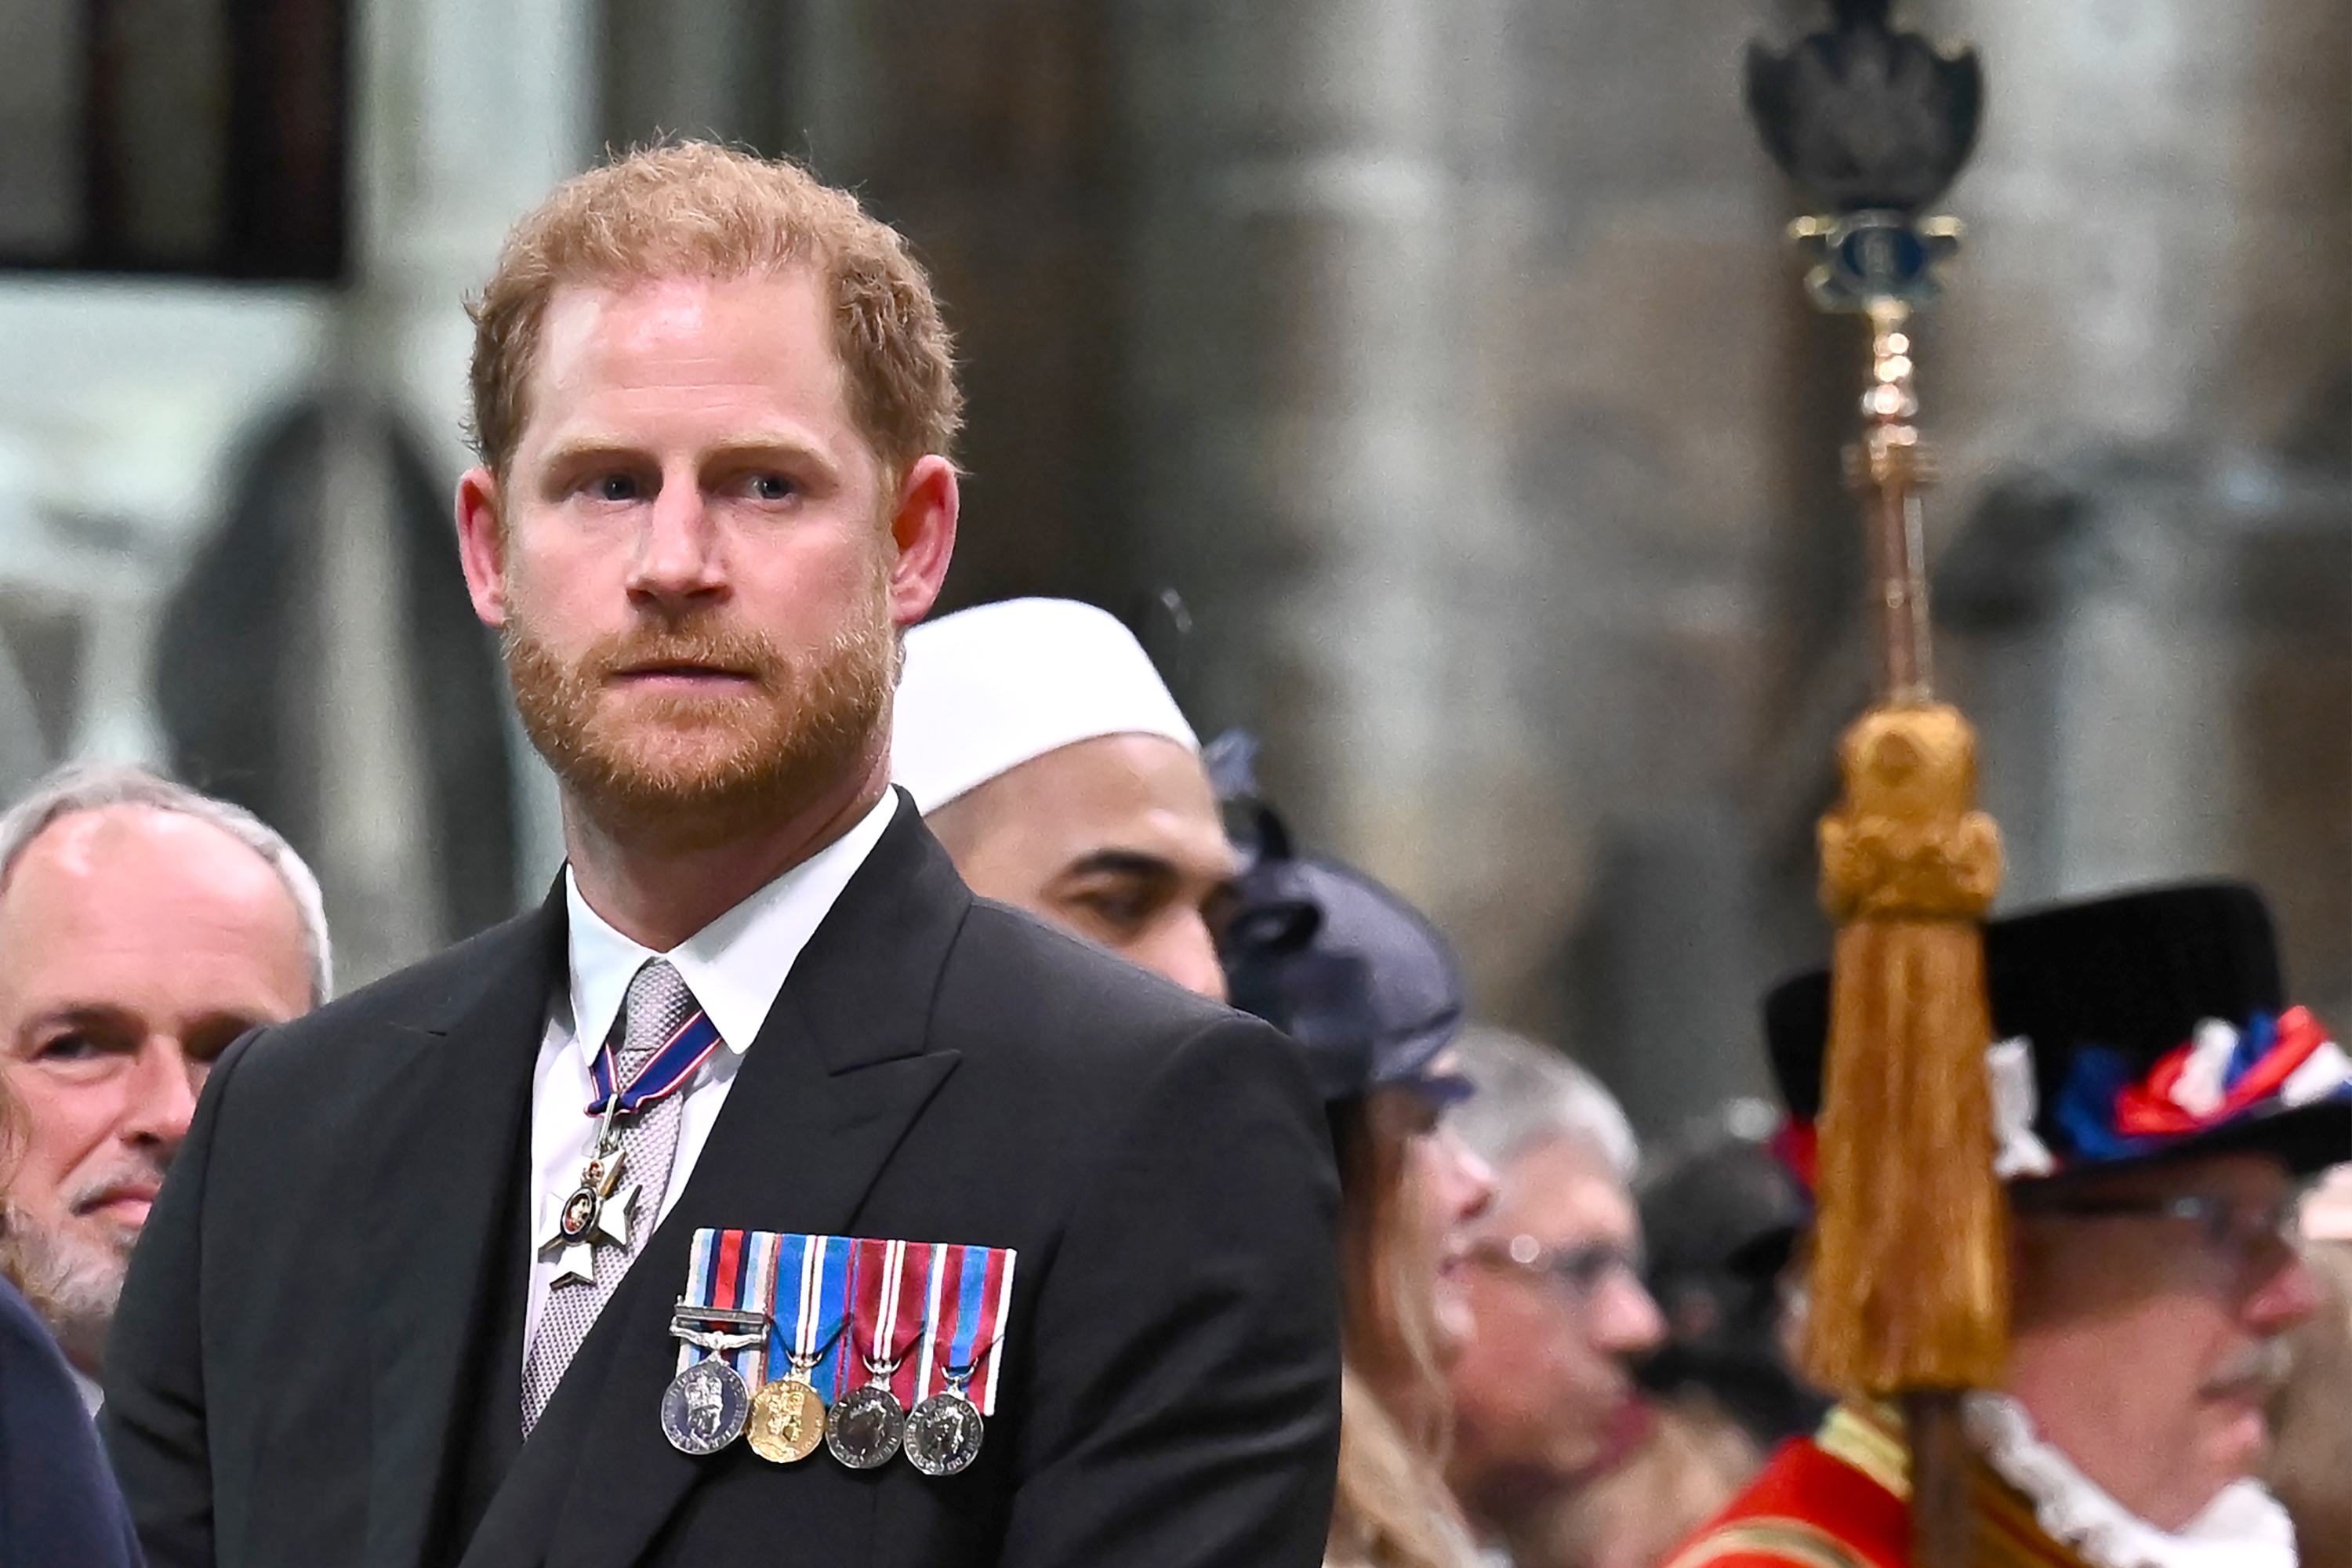 Prince Harry, Duke of Sussex attends the Coronation of King Charles III and Queen Camilla on May 6, 2023 in London, England | Source: Getty Images